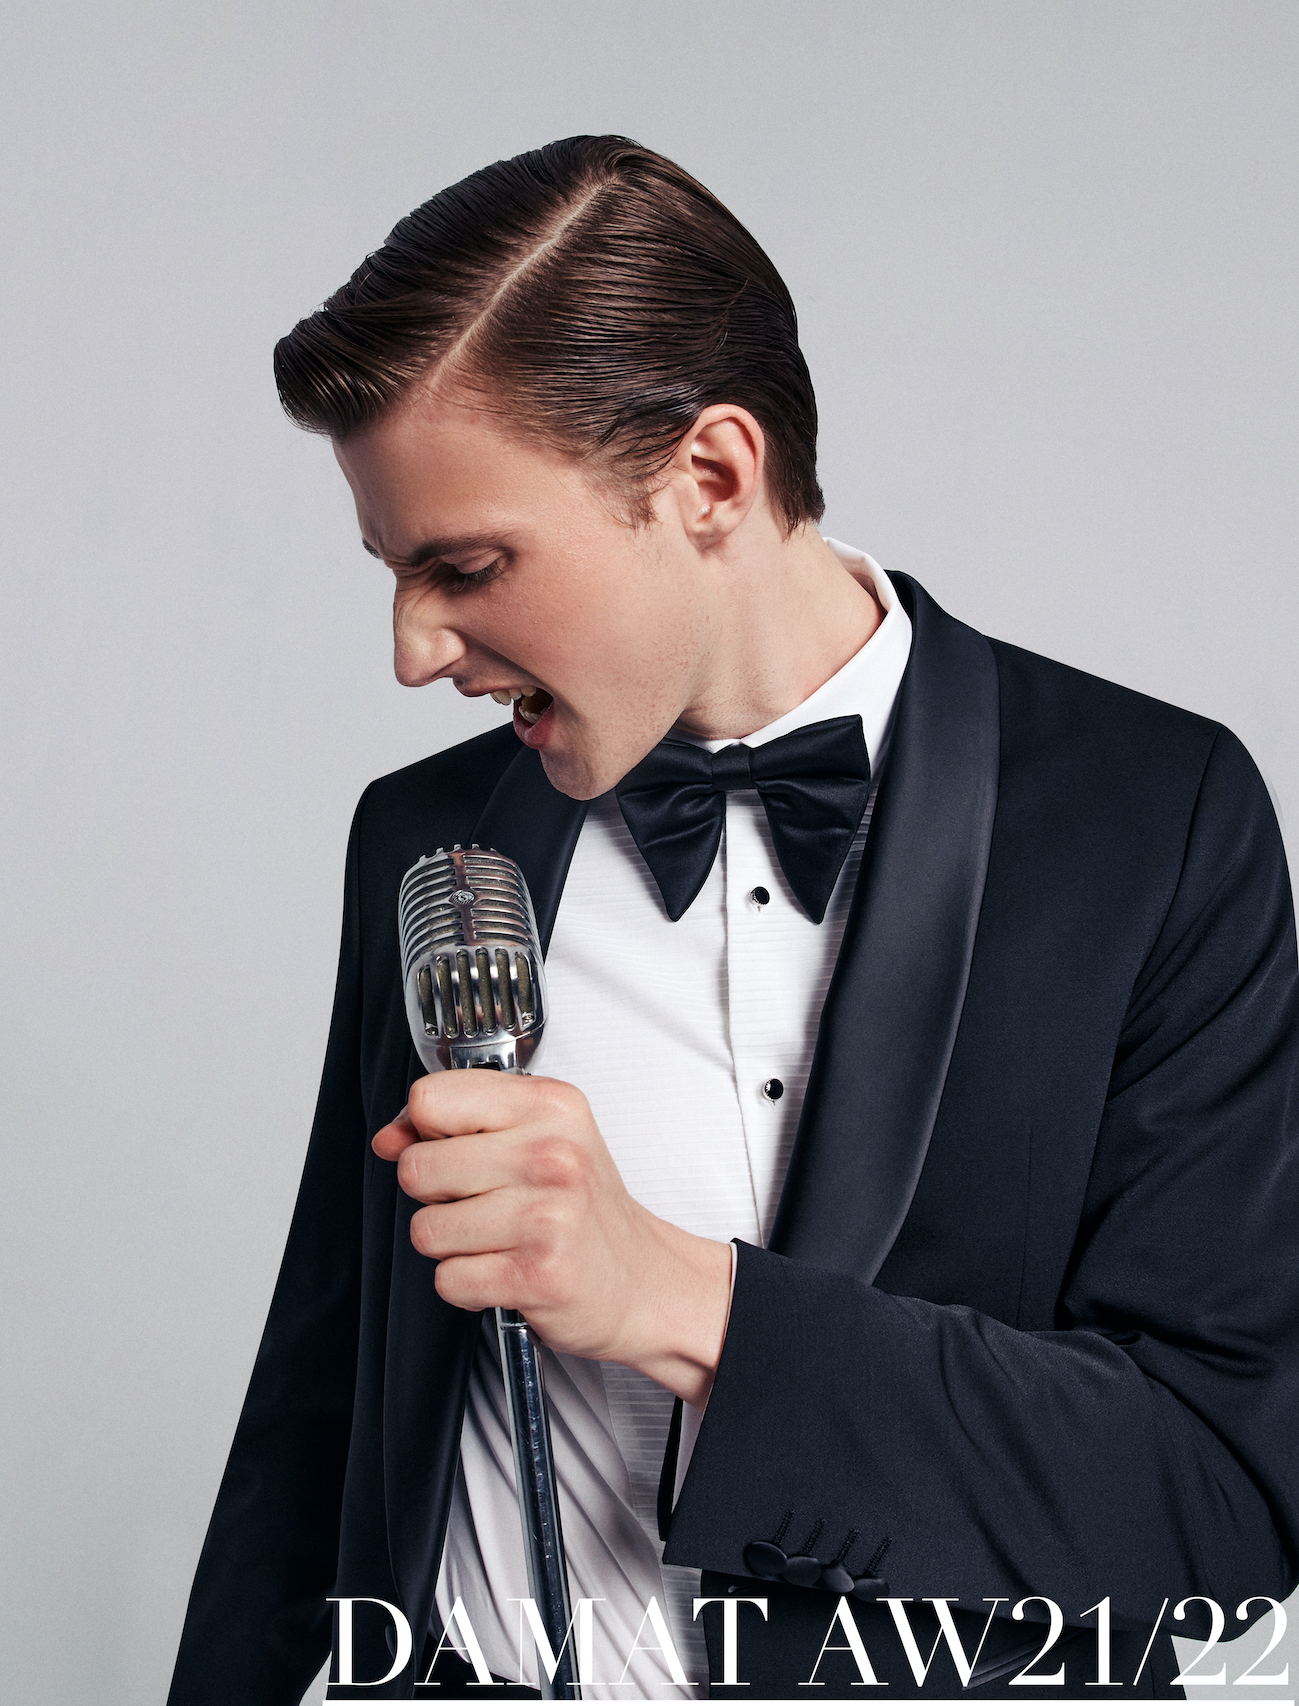 Tom for Damat Campaign FW 21/22